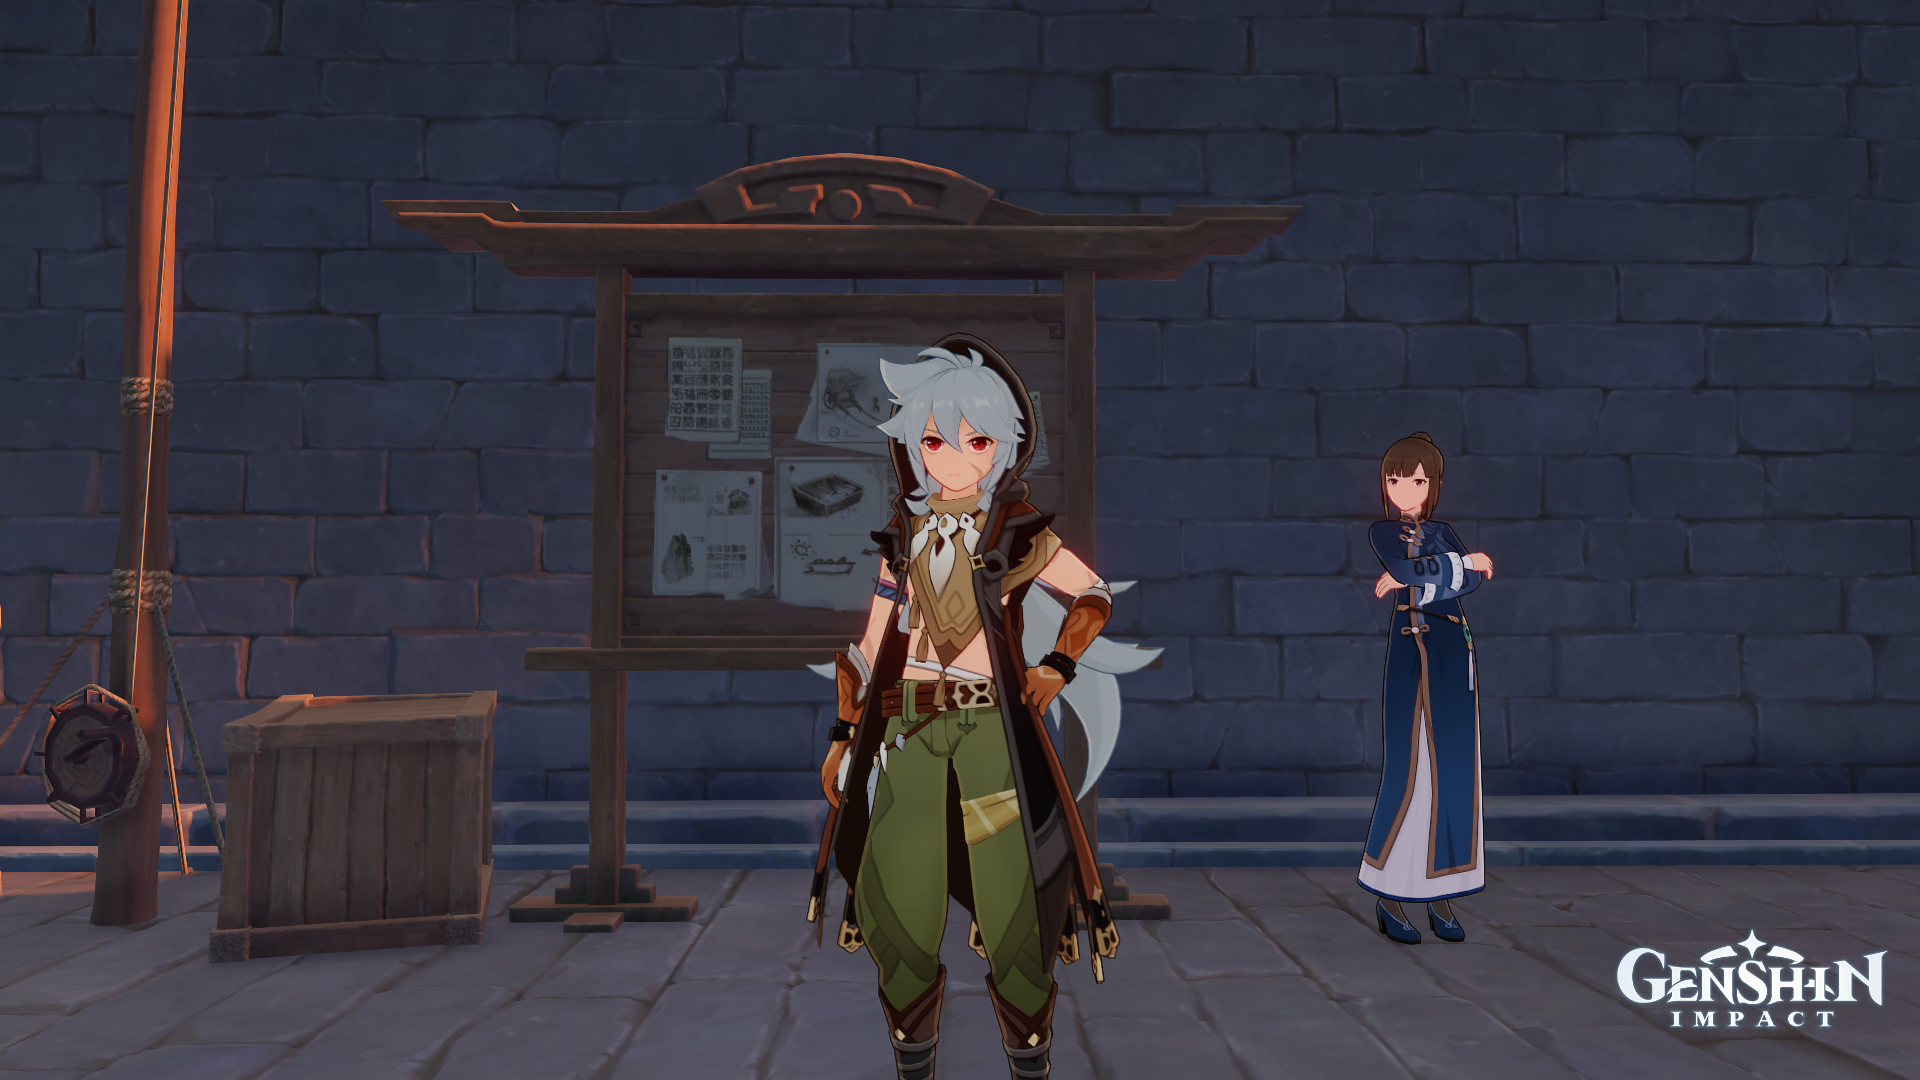 Razor standing in front of Liyue's Reputation Board and Ms. Yu in Genshin Impact.